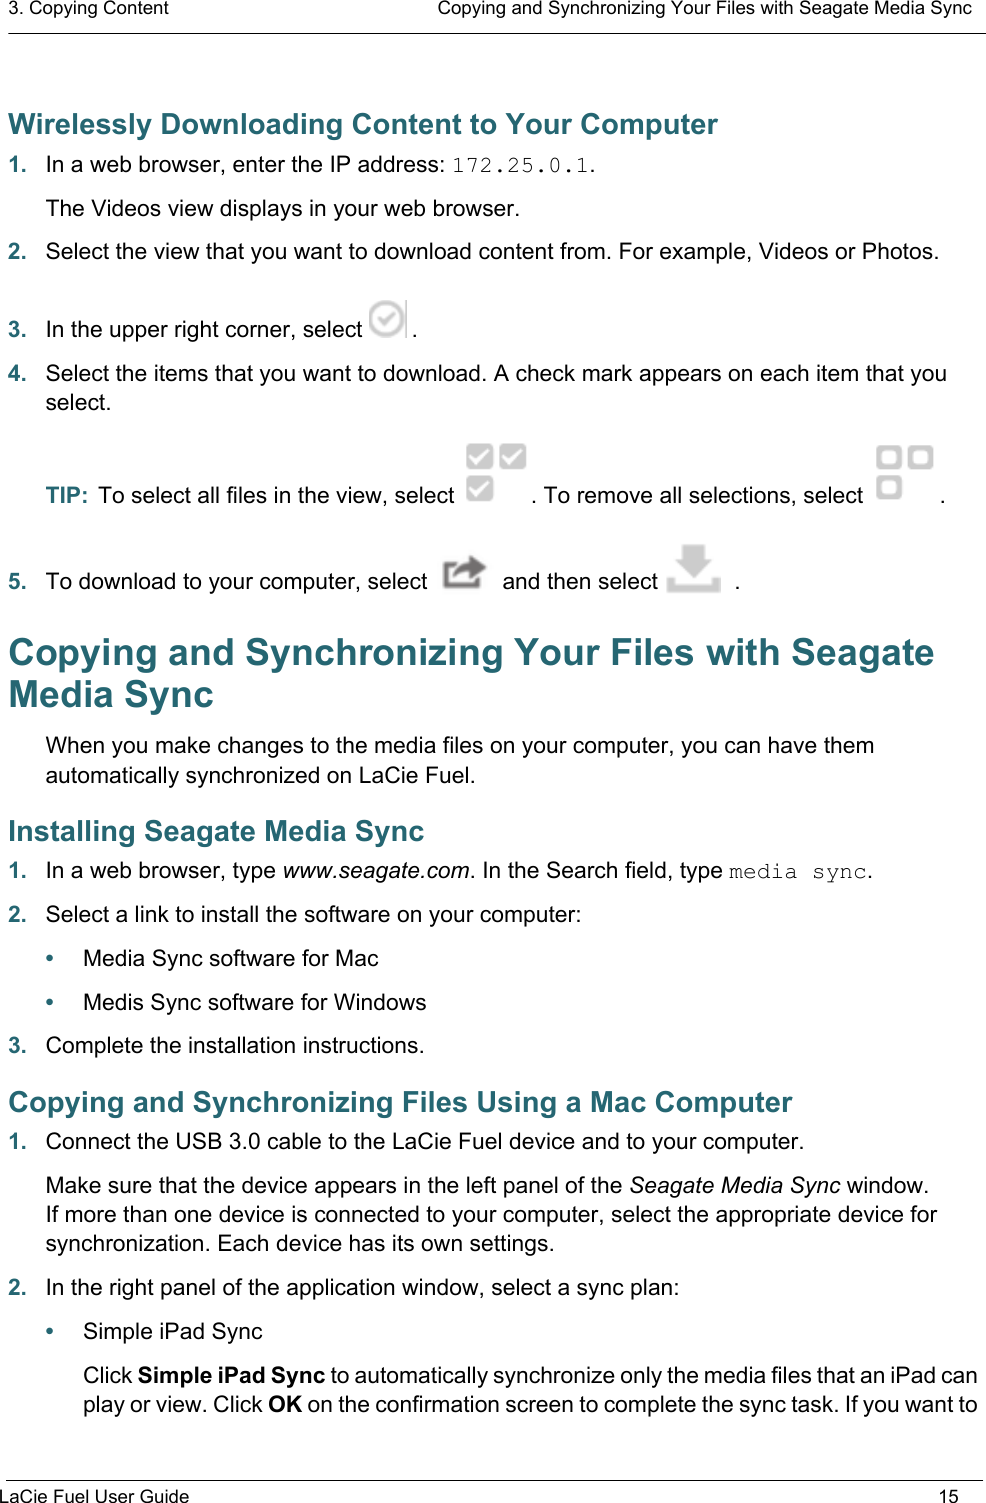 3. Copying Content  Copying and Synchronizing Your Files with Seagate Media SyncLaCie Fuel User Guide 15Wirelessly Downloading Content to Your Computer1. In a web browser, enter the IP address: 172.25.0.1. The Videos view displays in your web browser.2. Select the view that you want to download content from. For example, Videos or Photos. 3. In the upper right corner, select  .4. Select the items that you want to download. A check mark appears on each item that you select.TIP:  To select all files in the view, select  . To remove all selections, select  .5. To download to your computer, select   and then select  .Copying and Synchronizing Your Files with Seagate Media SyncWhen you make changes to the media files on your computer, you can have them automatically synchronized on LaCie Fuel.Installing Seagate Media Sync1. In a web browser, type www.seagate.com. In the Search field, type media sync.2. Select a link to install the software on your computer:•Media Sync software for Mac•Medis Sync software for Windows3. Complete the installation instructions.Copying and Synchronizing Files Using a Mac Computer1. Connect the USB 3.0 cable to the LaCie Fuel device and to your computer.Make sure that the device appears in the left panel of the Seagate Media Sync window. If more than one device is connected to your computer, select the appropriate device for synchronization. Each device has its own settings.2. In the right panel of the application window, select a sync plan: •Simple iPad SyncClick Simple iPad Sync to automatically synchronize only the media files that an iPad can play or view. Click OK on the confirmation screen to complete the sync task. If you want to 